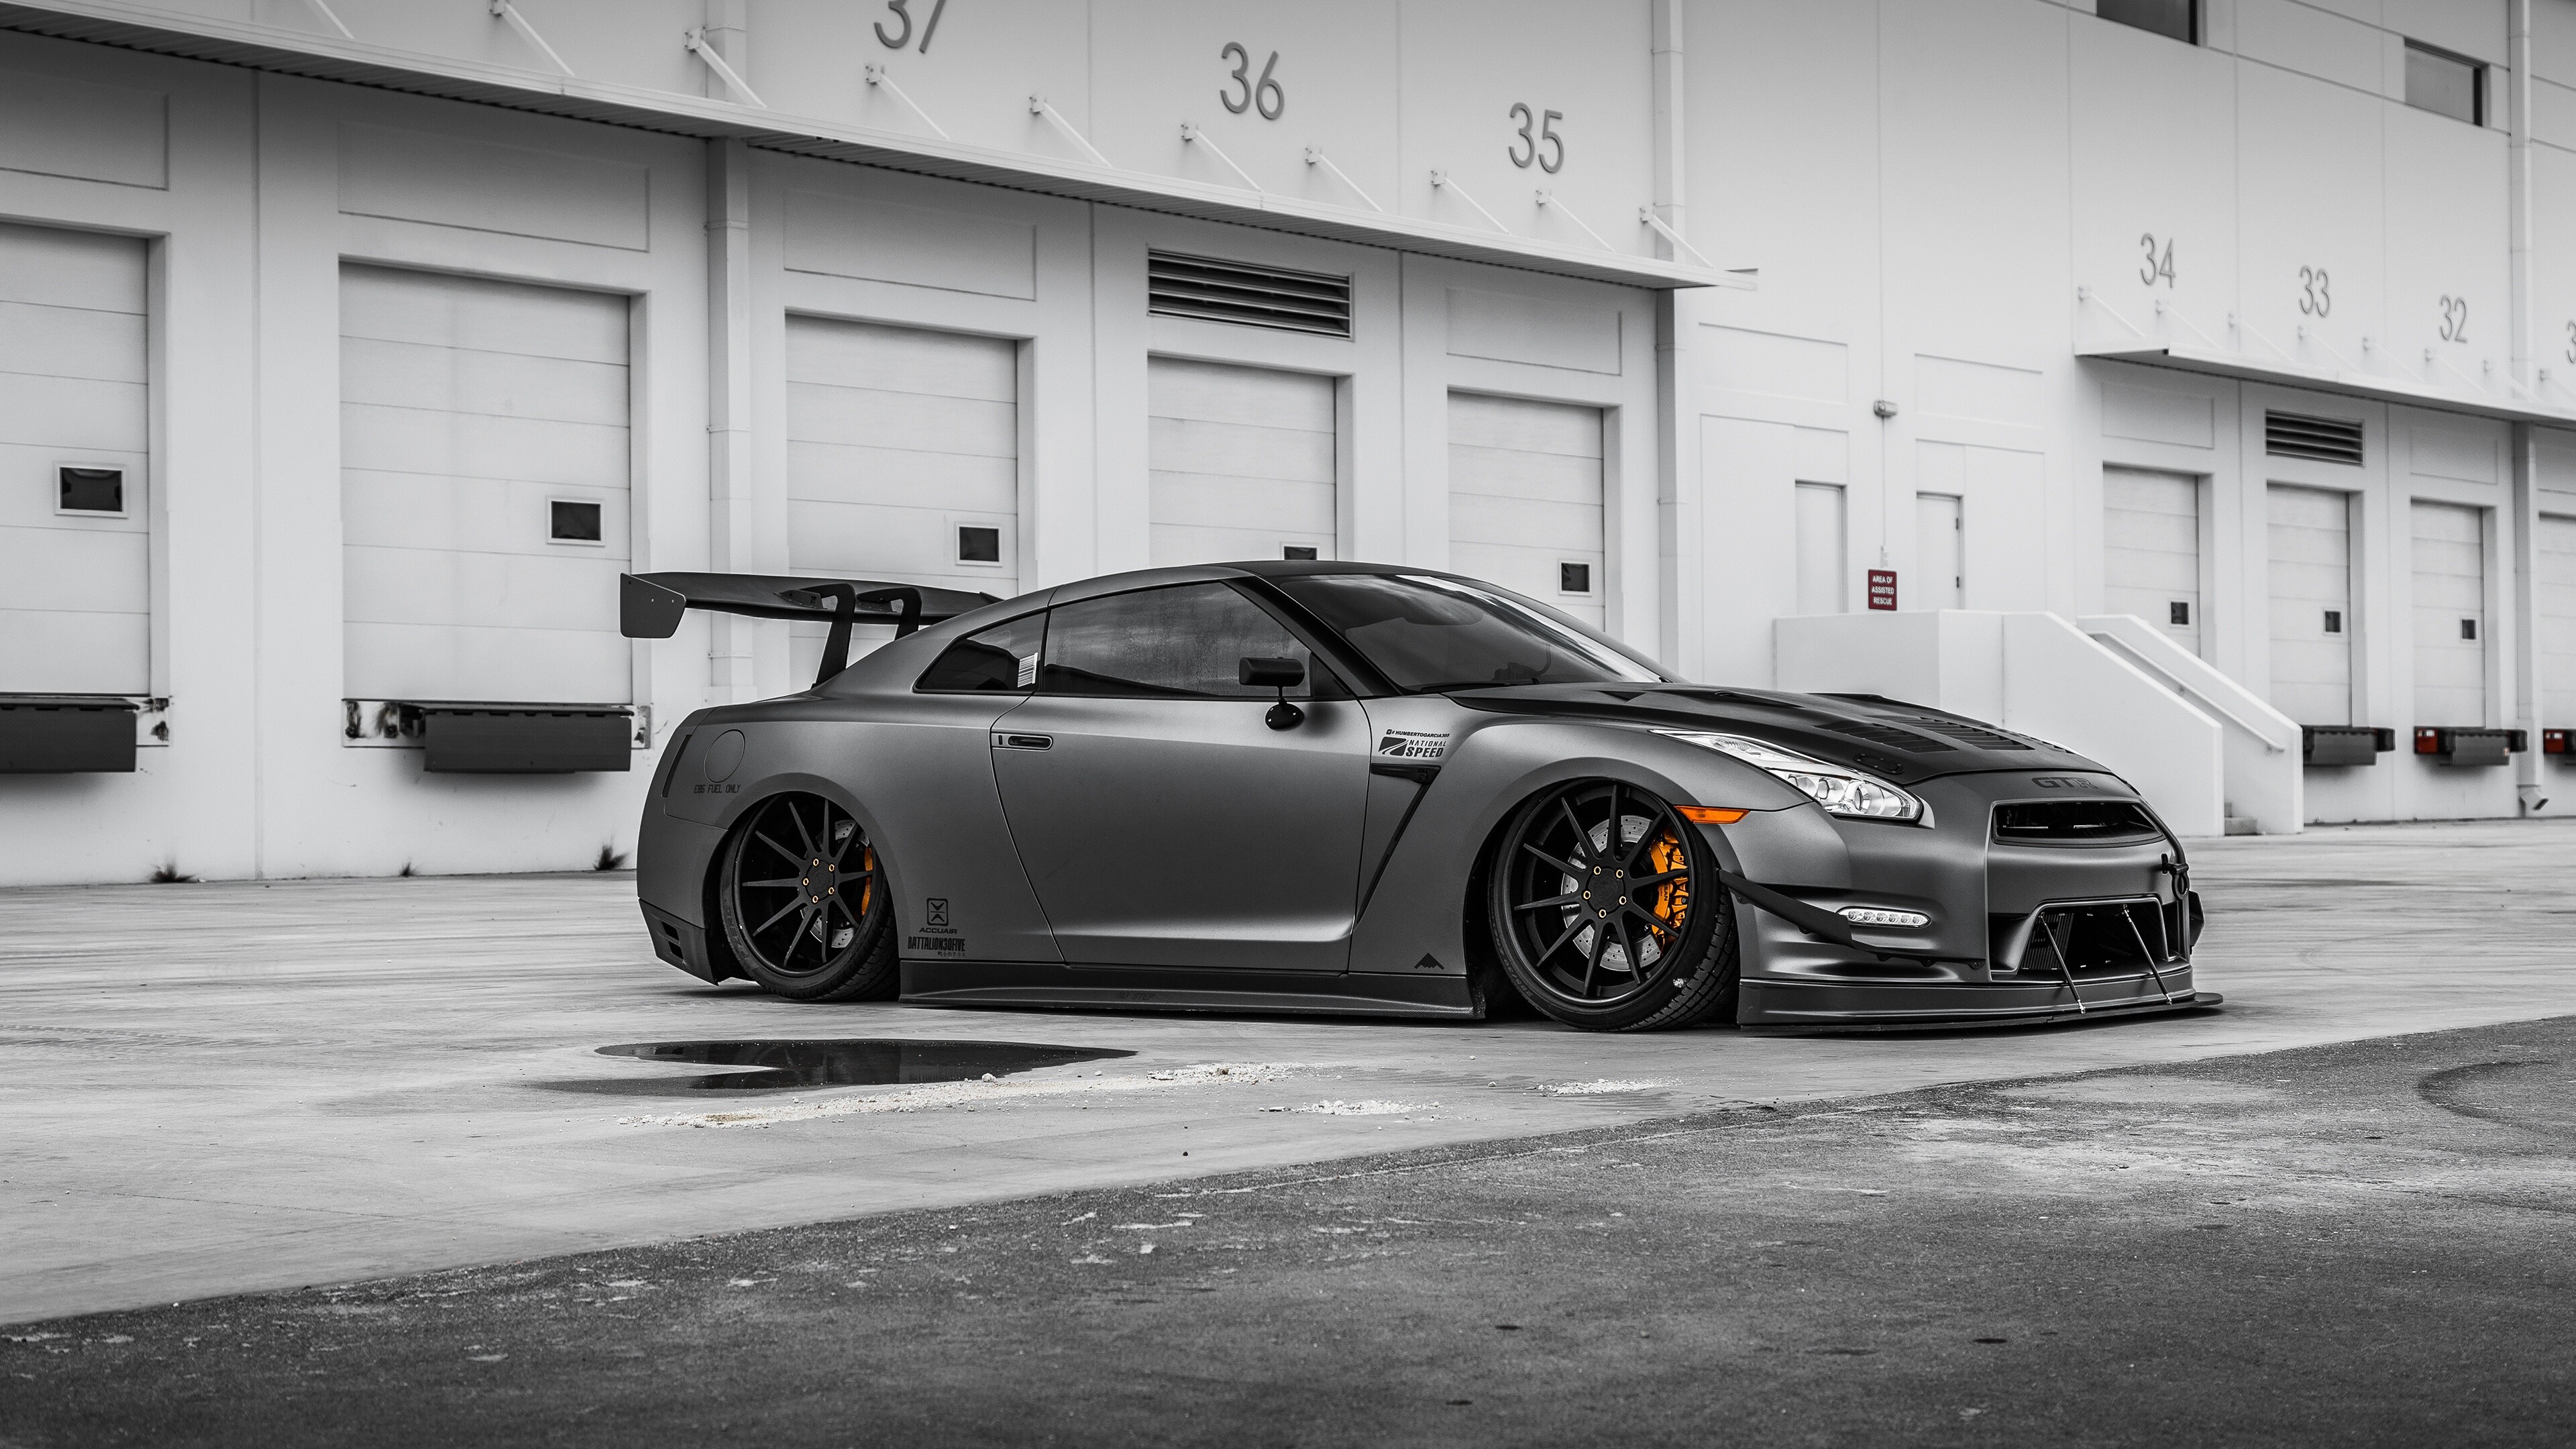 Nissan: Automaker, Known for athletic sports cars, GT-R. 3840x2160 4K Background.